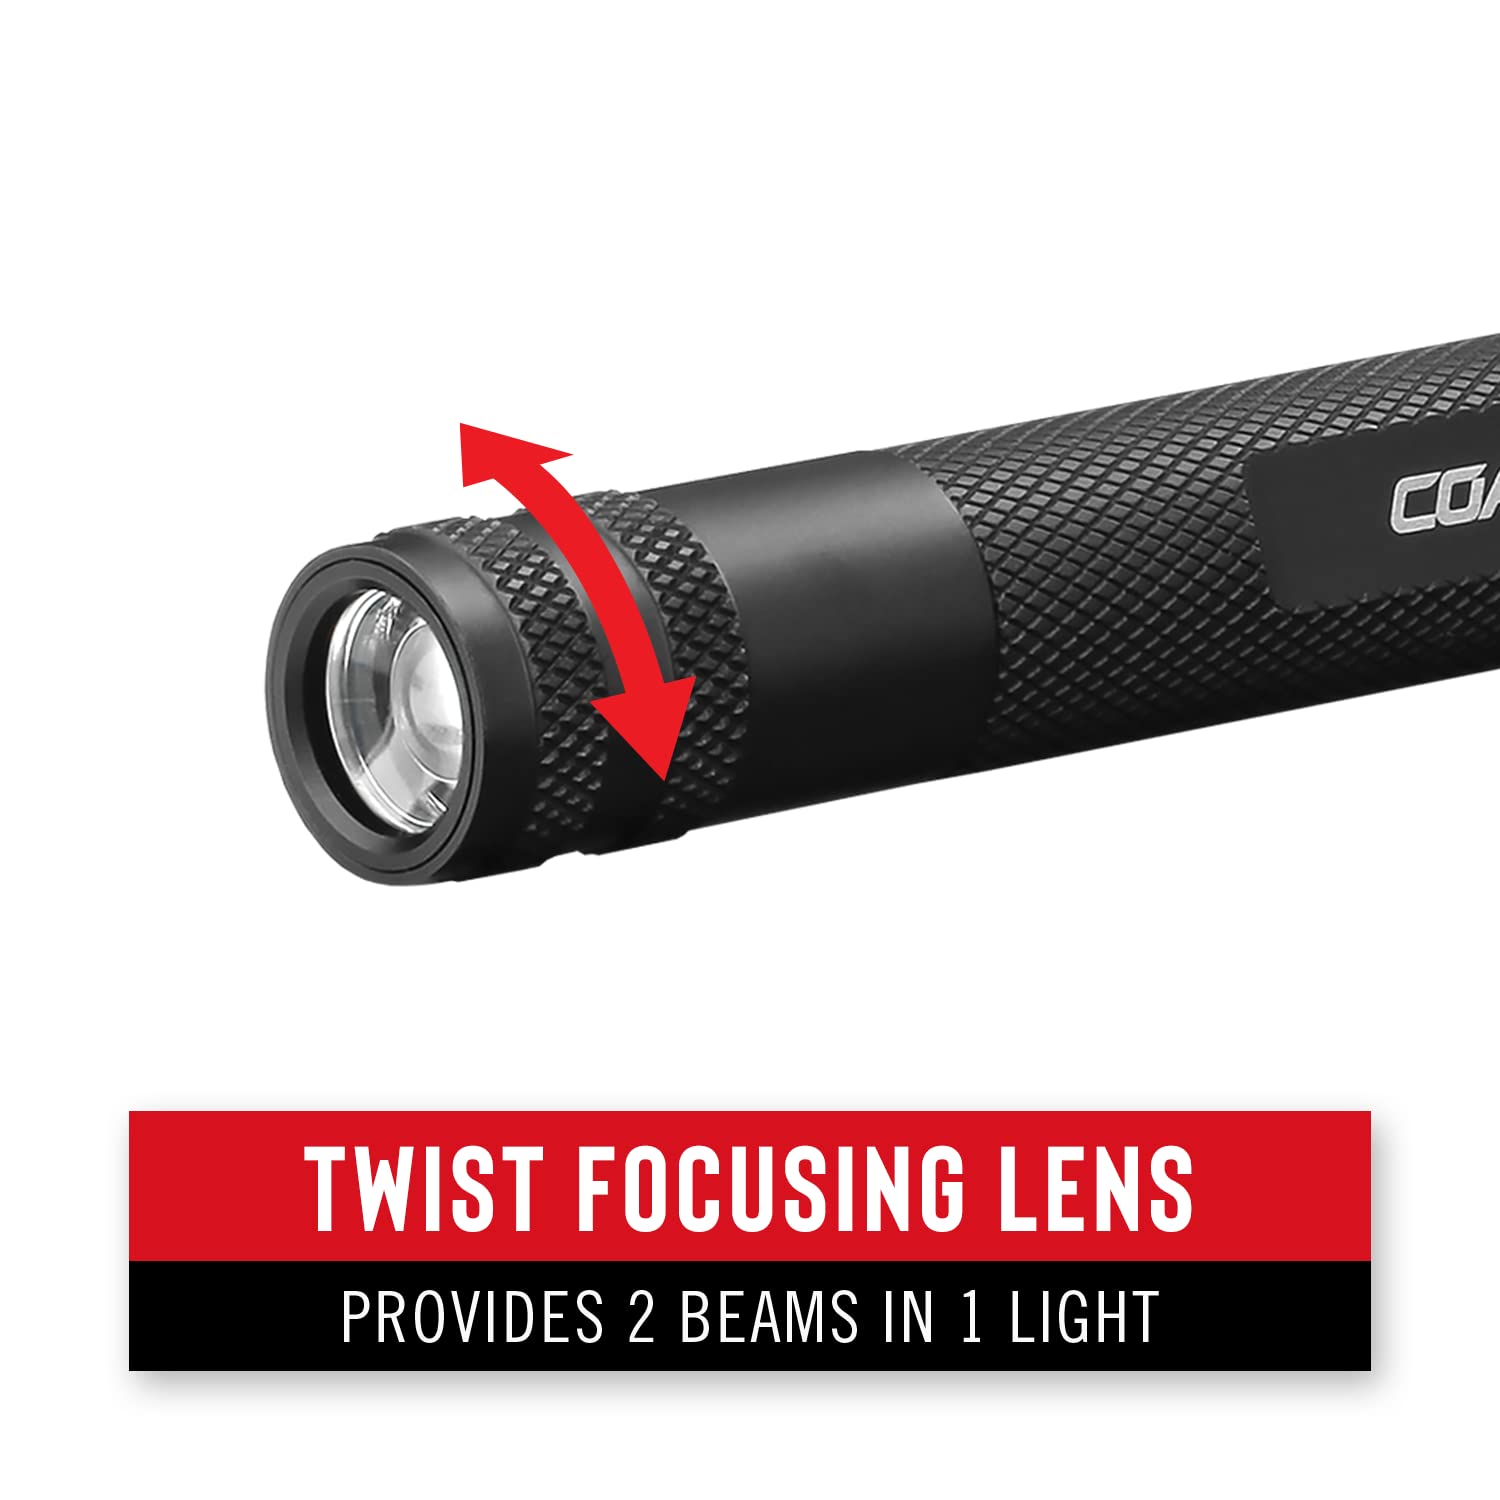 Coast HP3R 385 Lumen Rechargeable LED Penlight with Twist Focus, Red